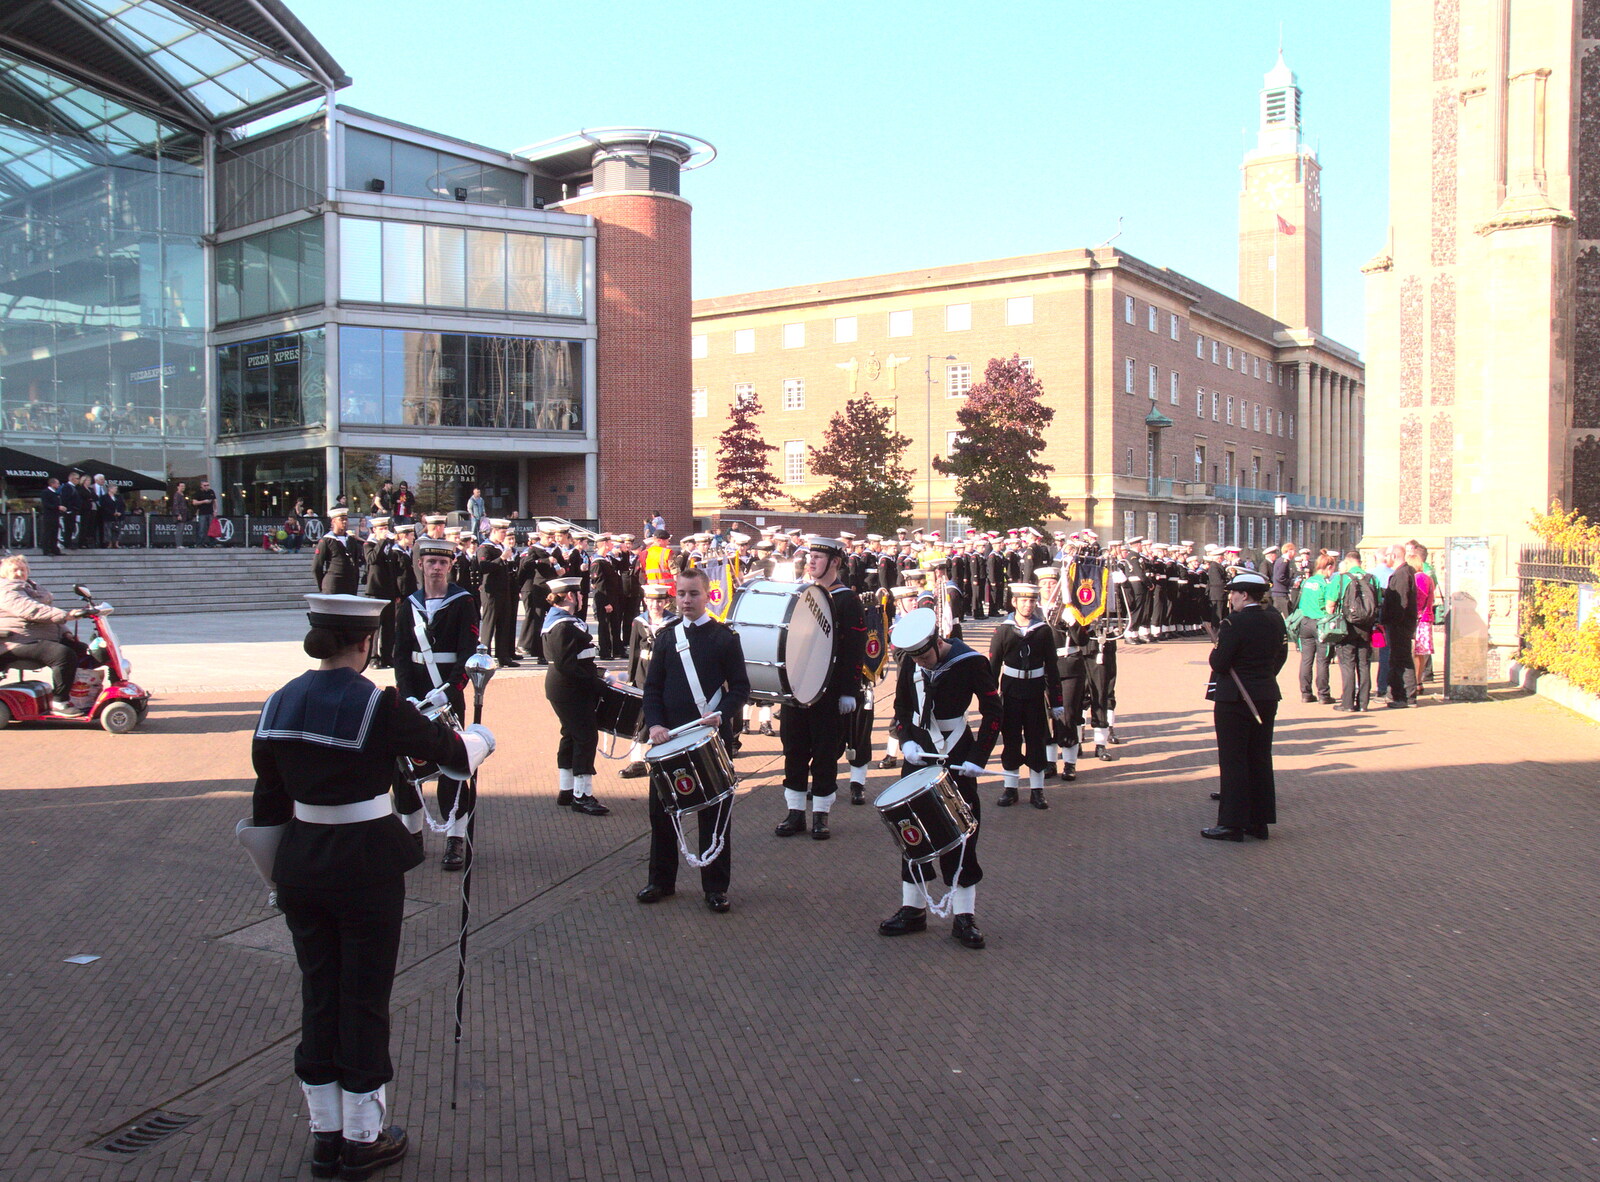 The Sea Cadets band outside the Forum from Trafalgar Day and Pizza, Norwich, Norfolk - 15th October 2017